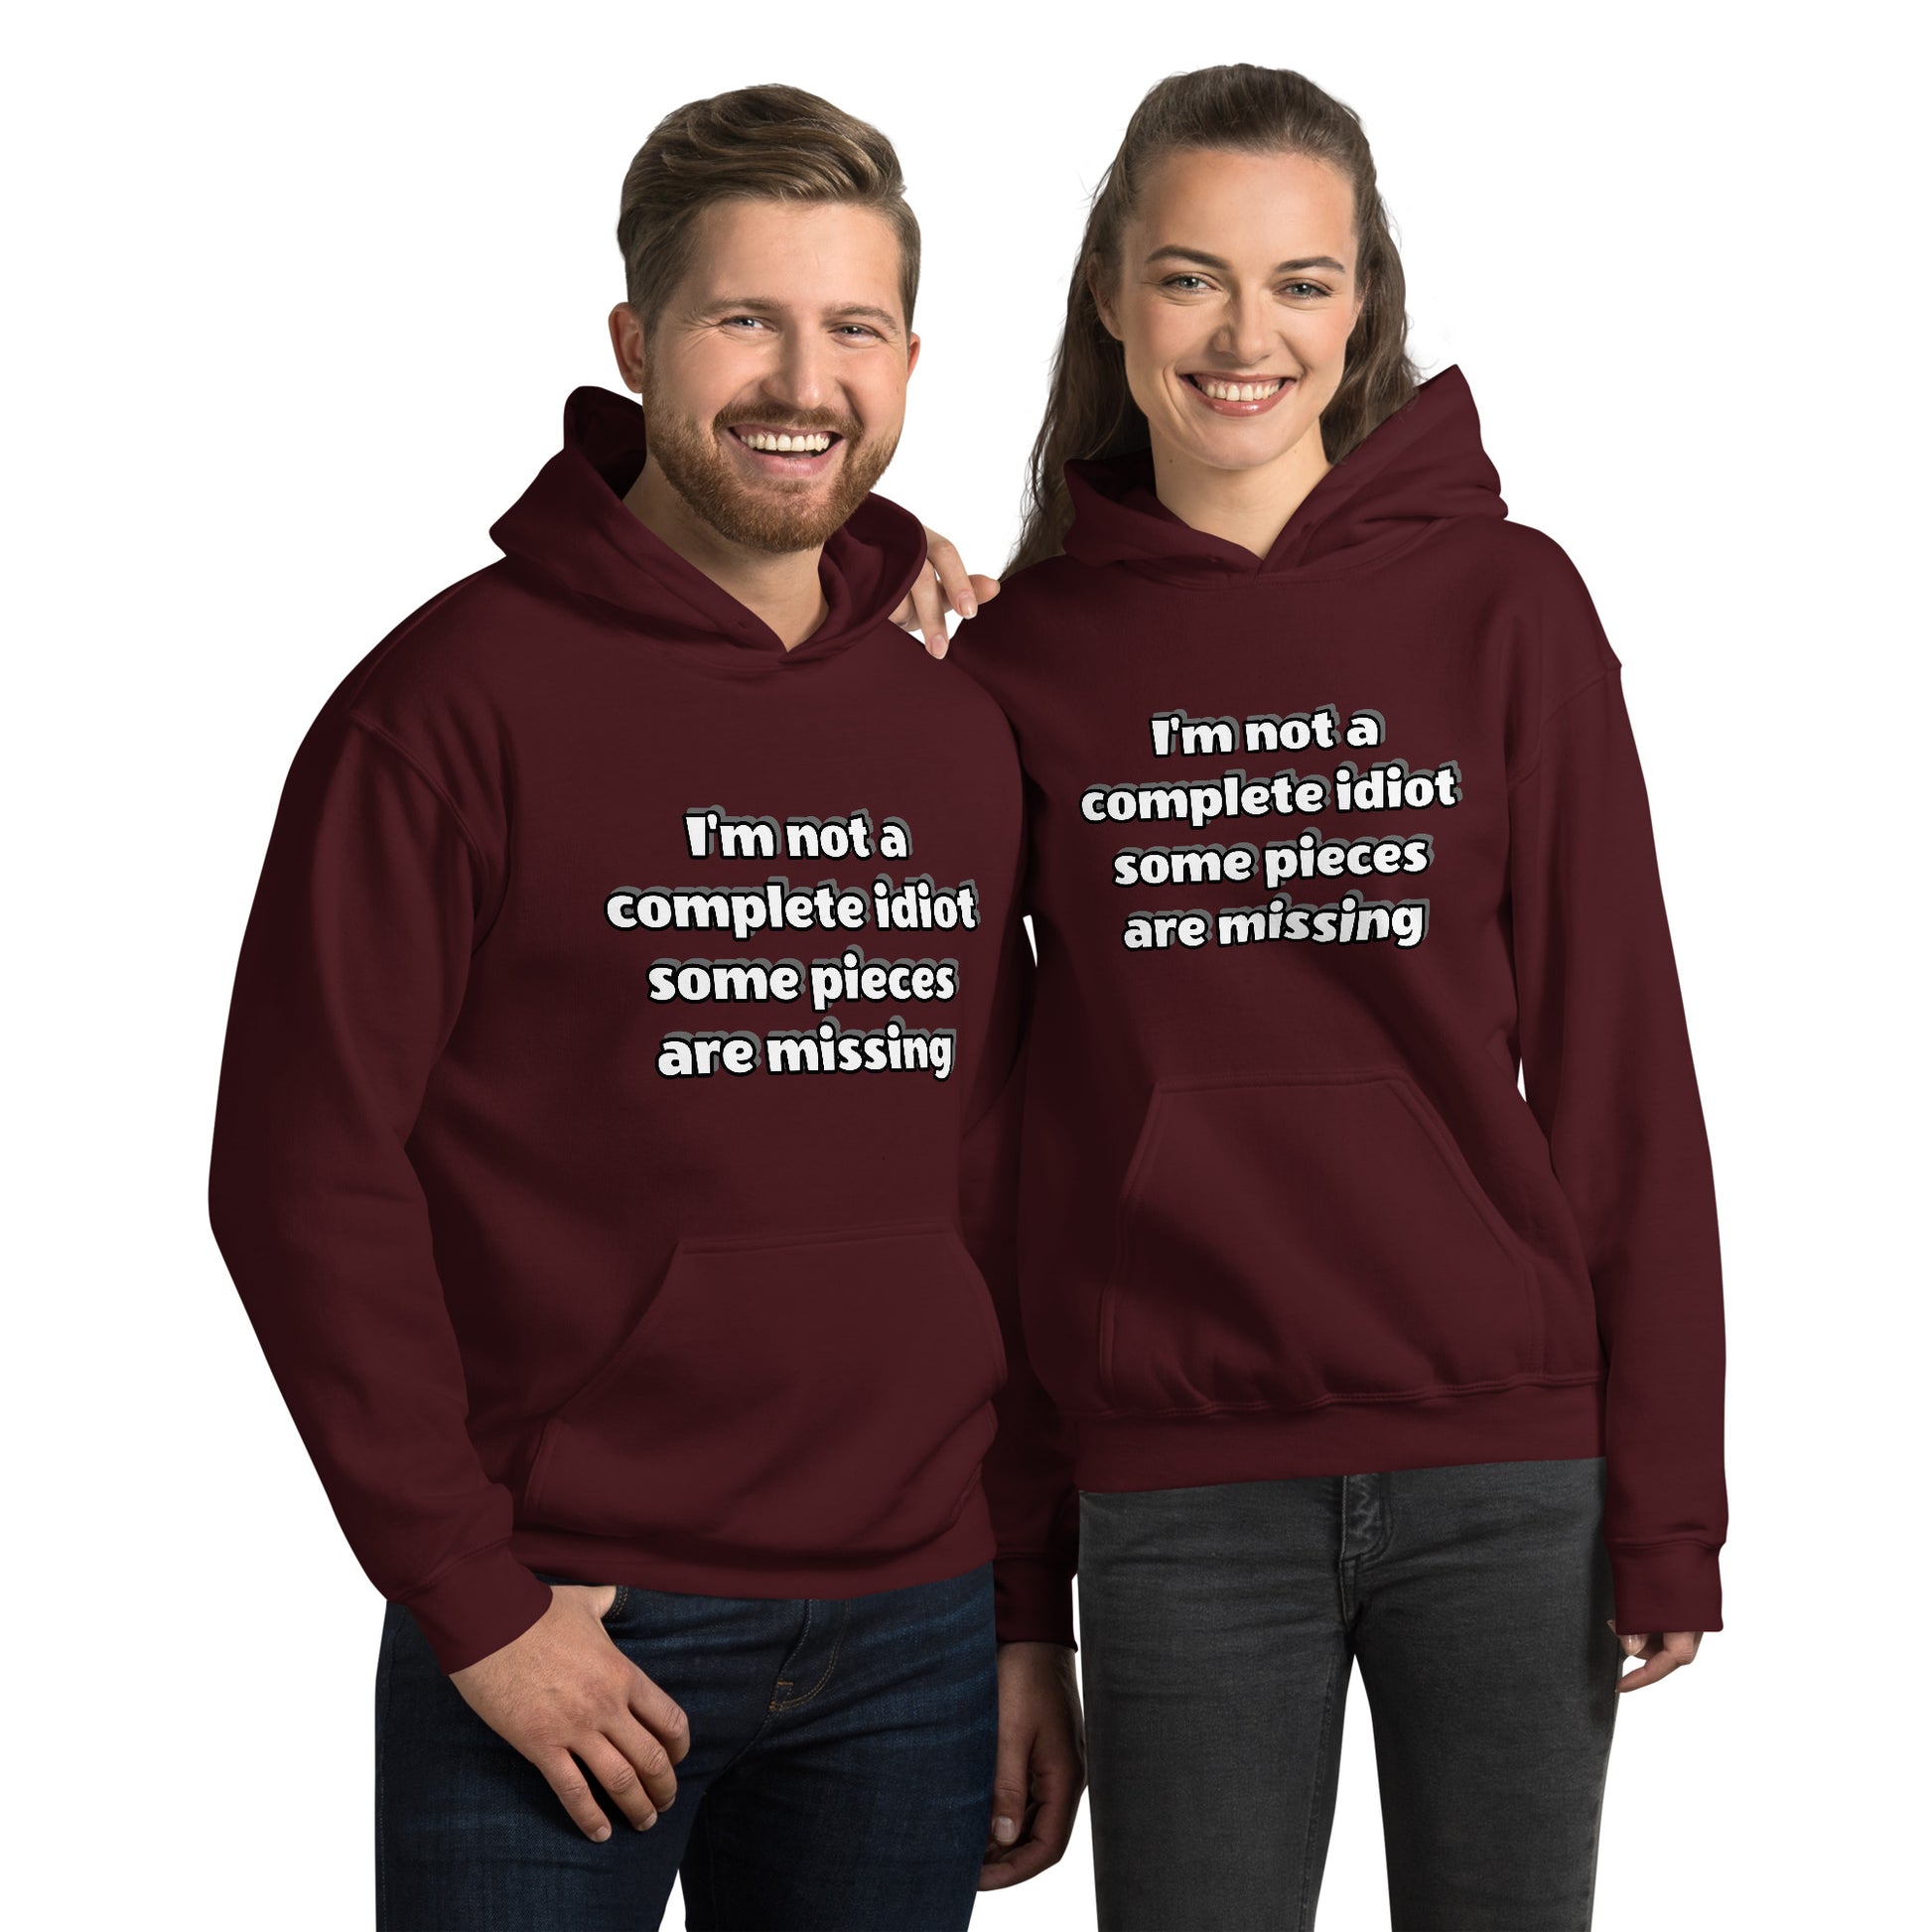 Men and women with maroon hoodie with text “I’m not a complete idiot, some pieces are missing”